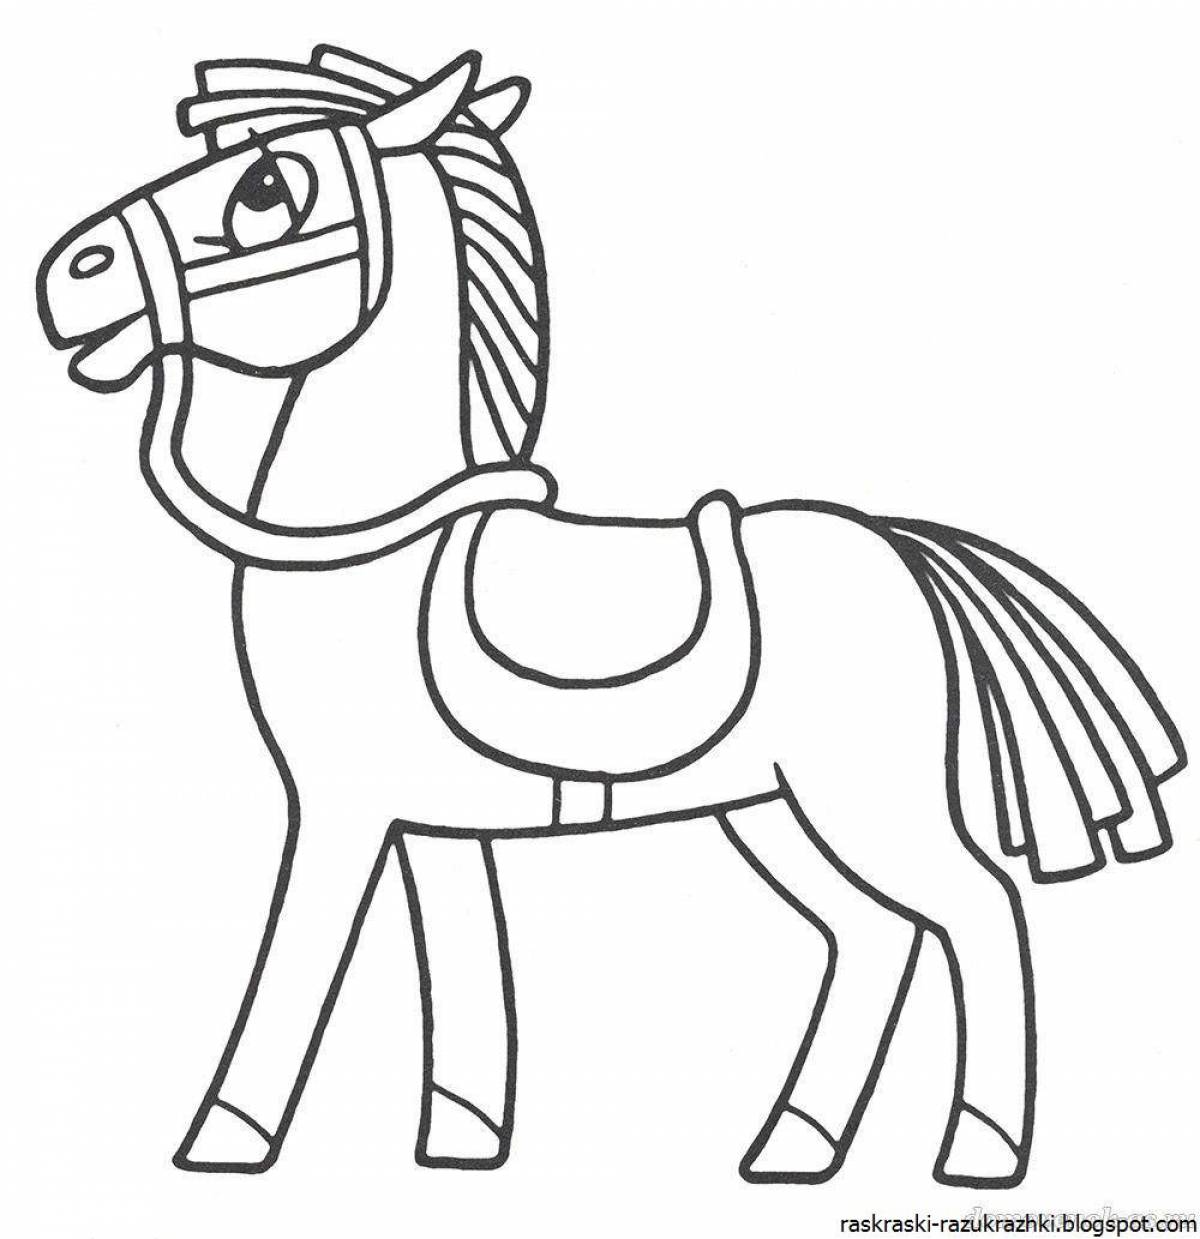 Coloring page joyful horse for children 3-4 years old